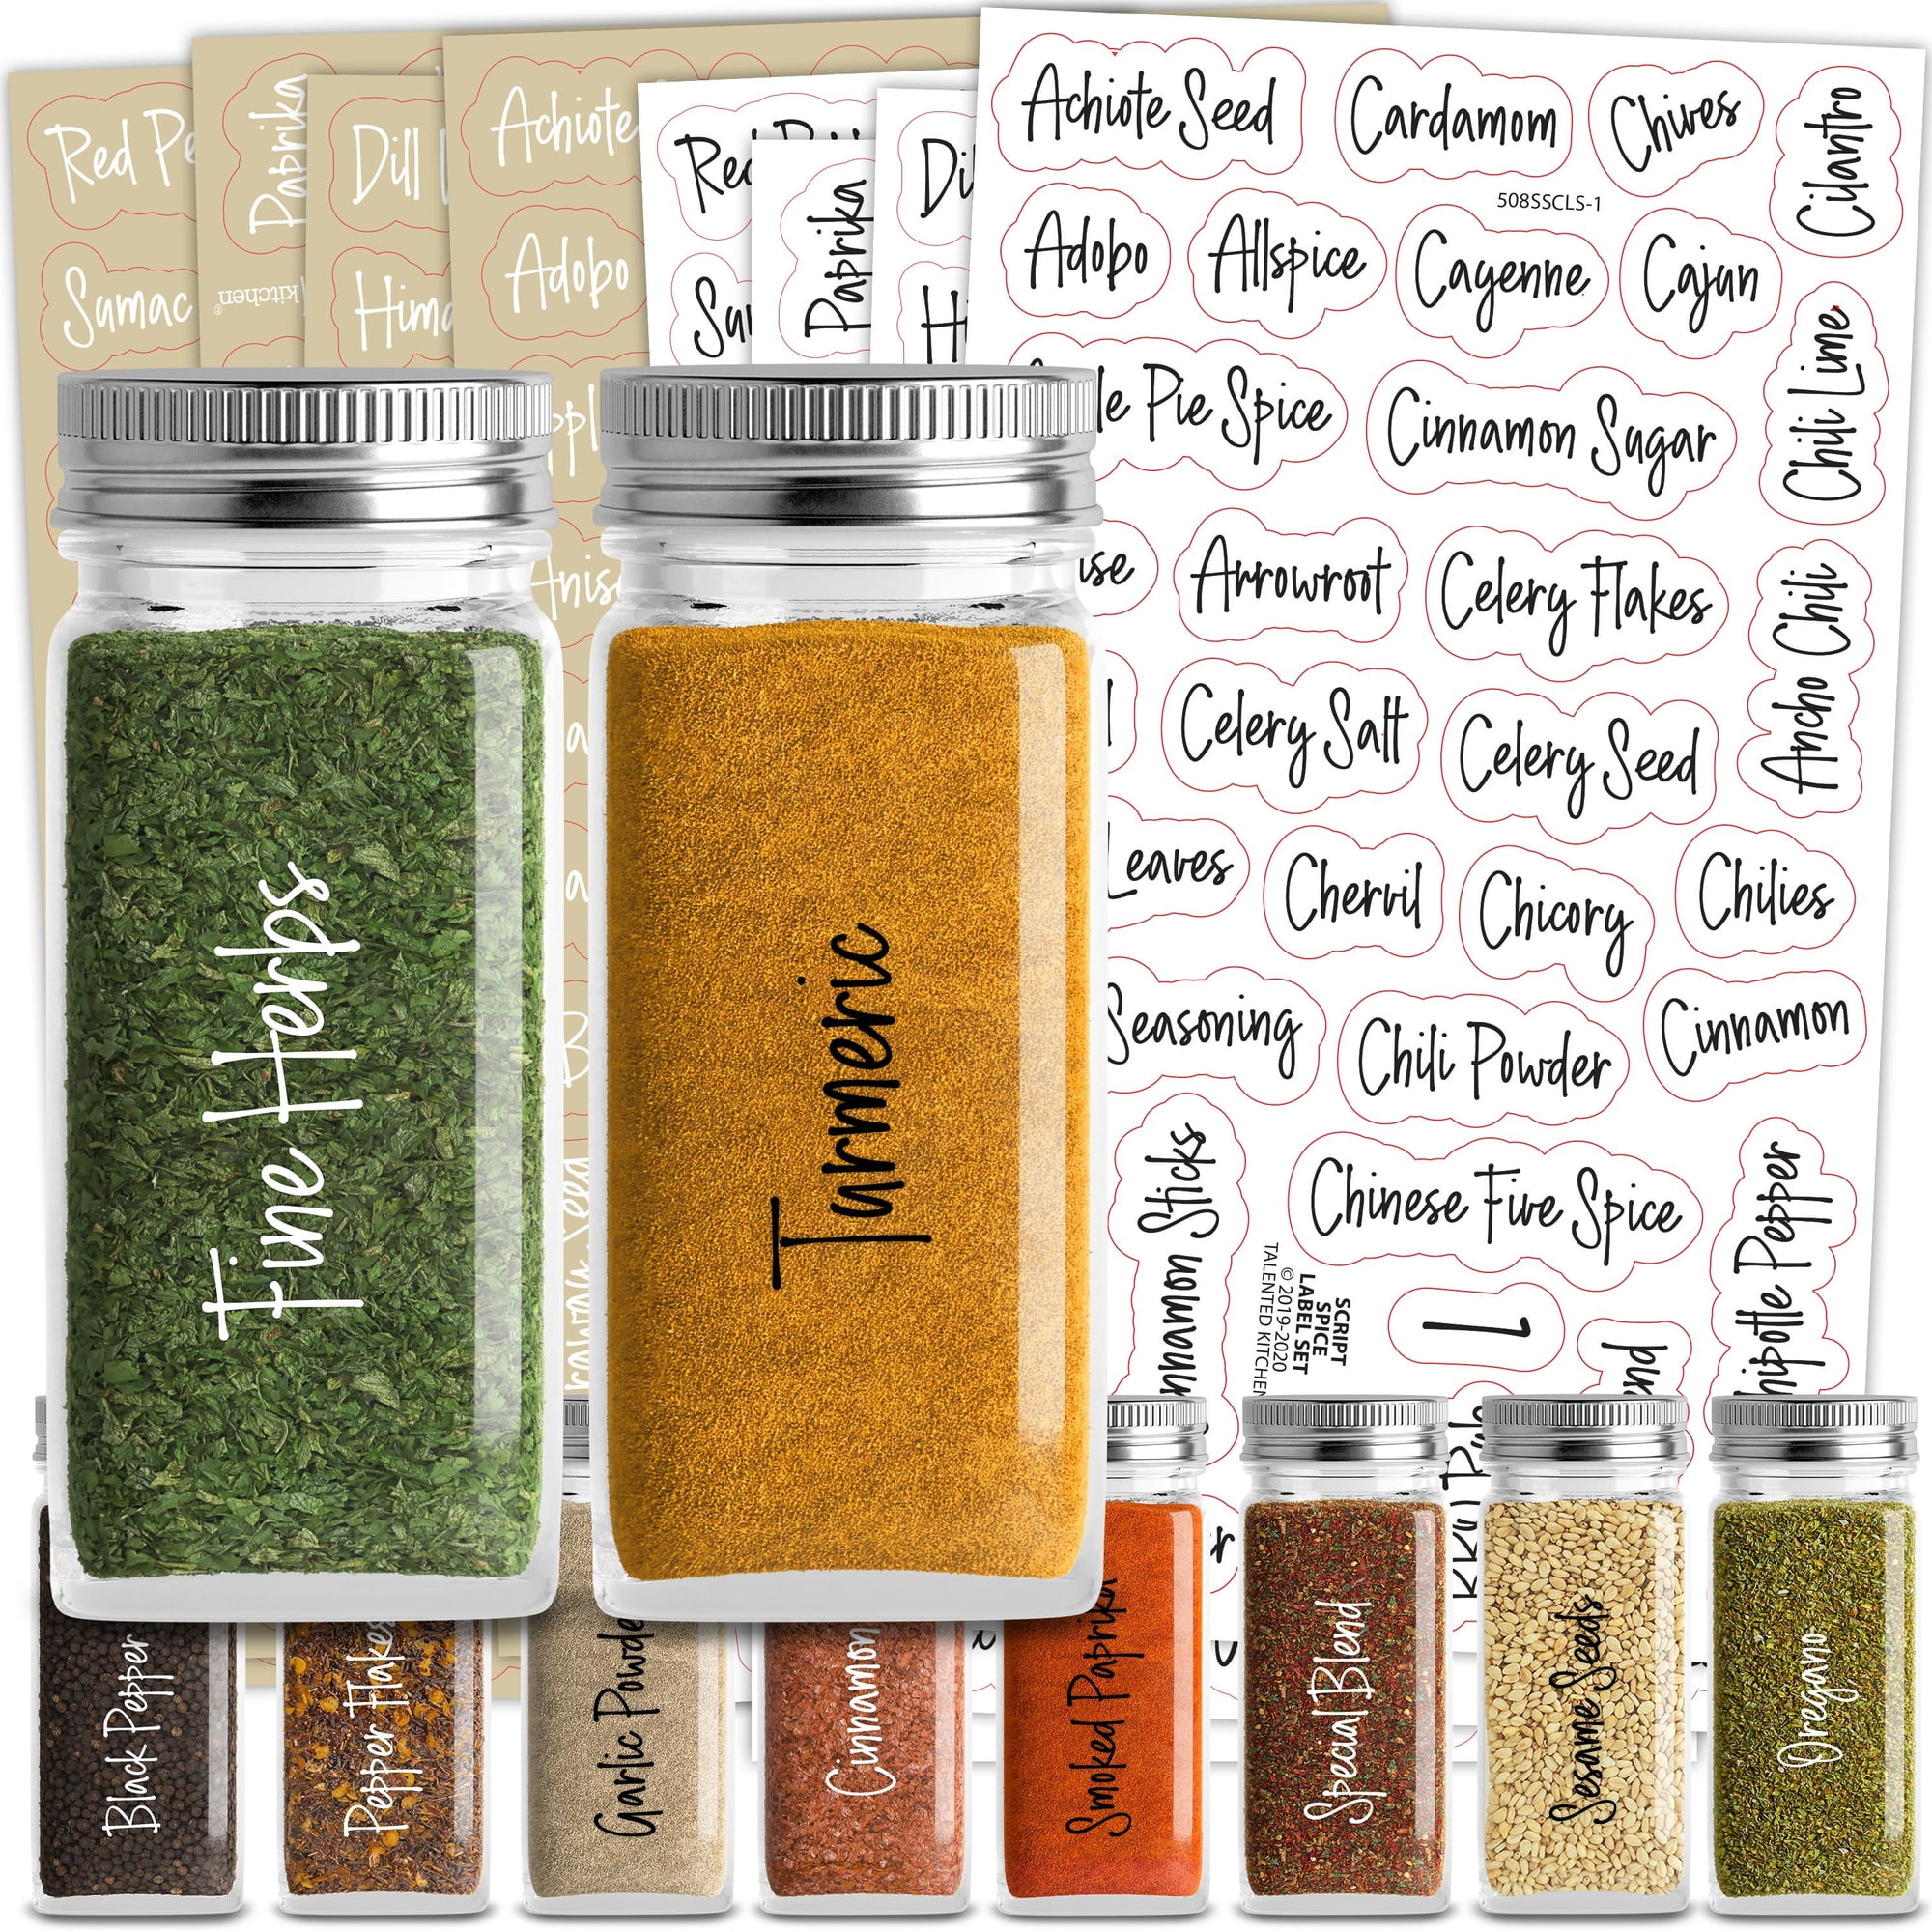 136pcs Spice Labels - Clear Spice Jar Labels Preprinted for Seasoning Herbs  Kitchen Spice Rack Organization, Water Resistant Stickers, Black and White  Script